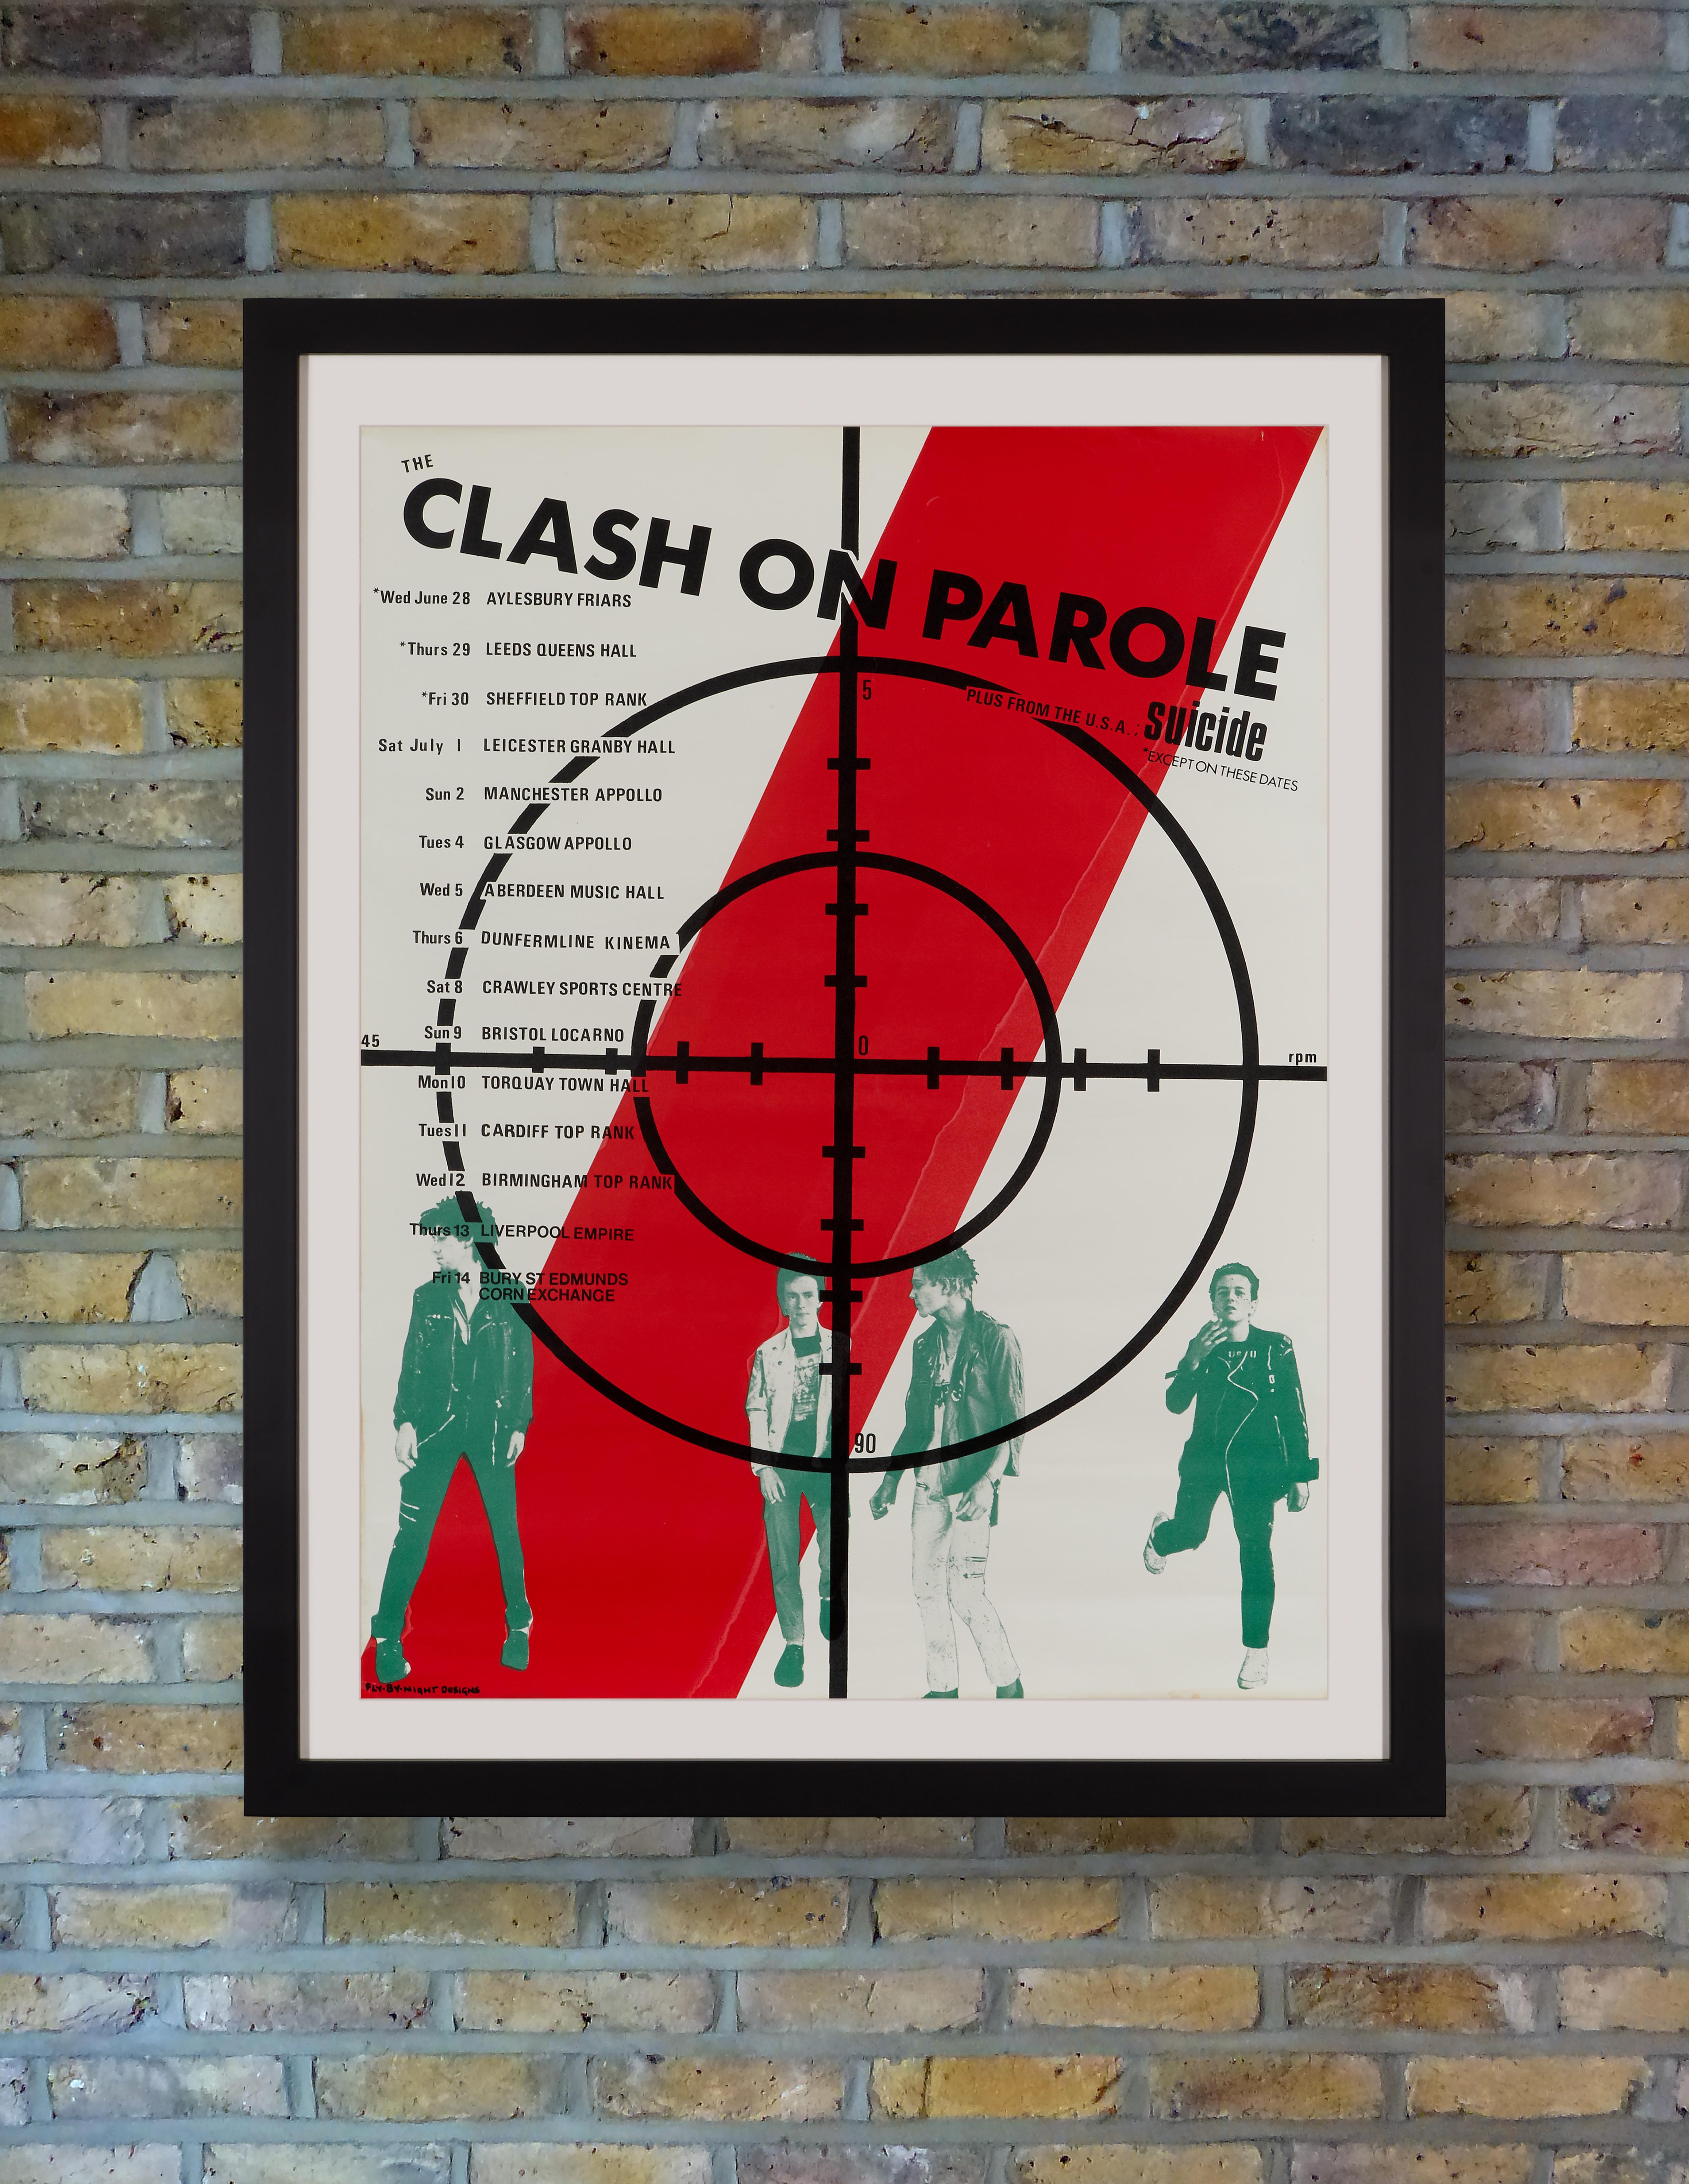 A bold original silkscreen tour poster for British punk rock band The Clash's UK 'Clash On Parole' tour, from June-July 1978, following the release of their single 